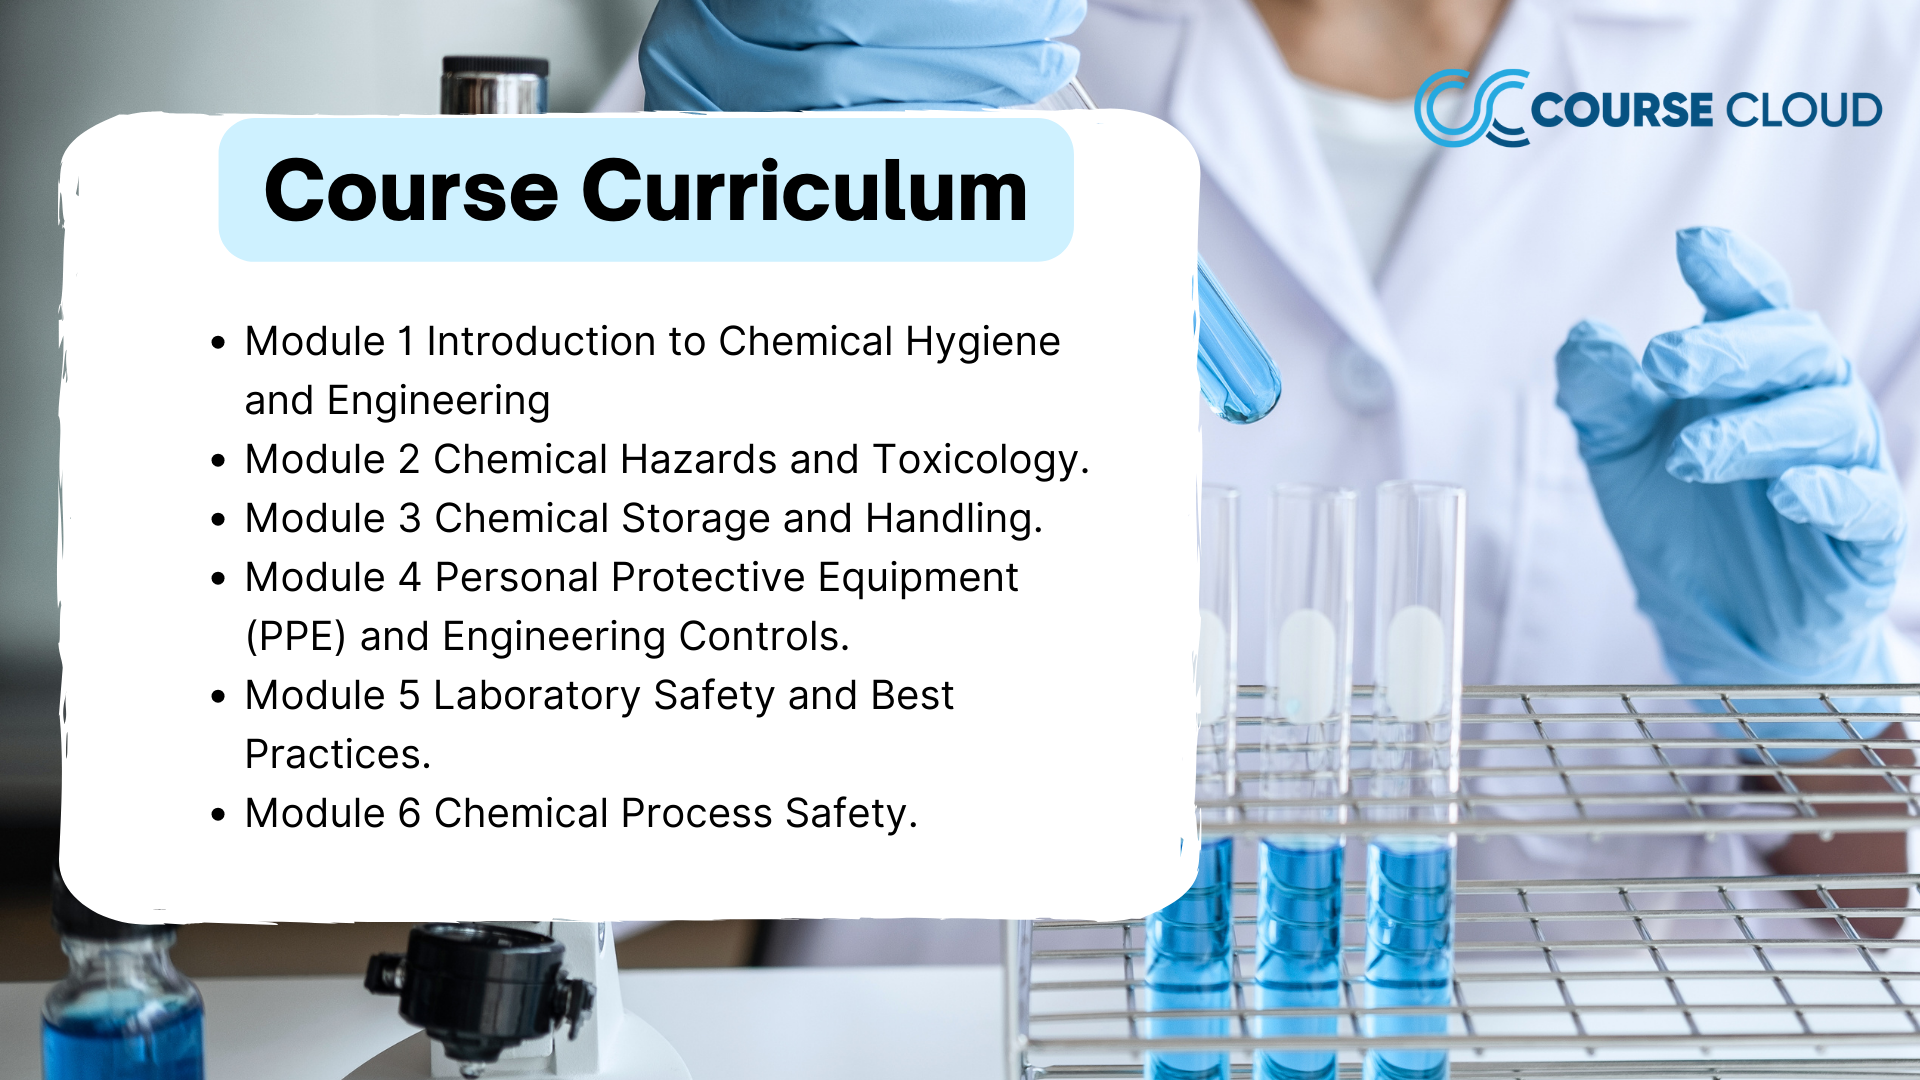 Chemical Hygiene and Engineering